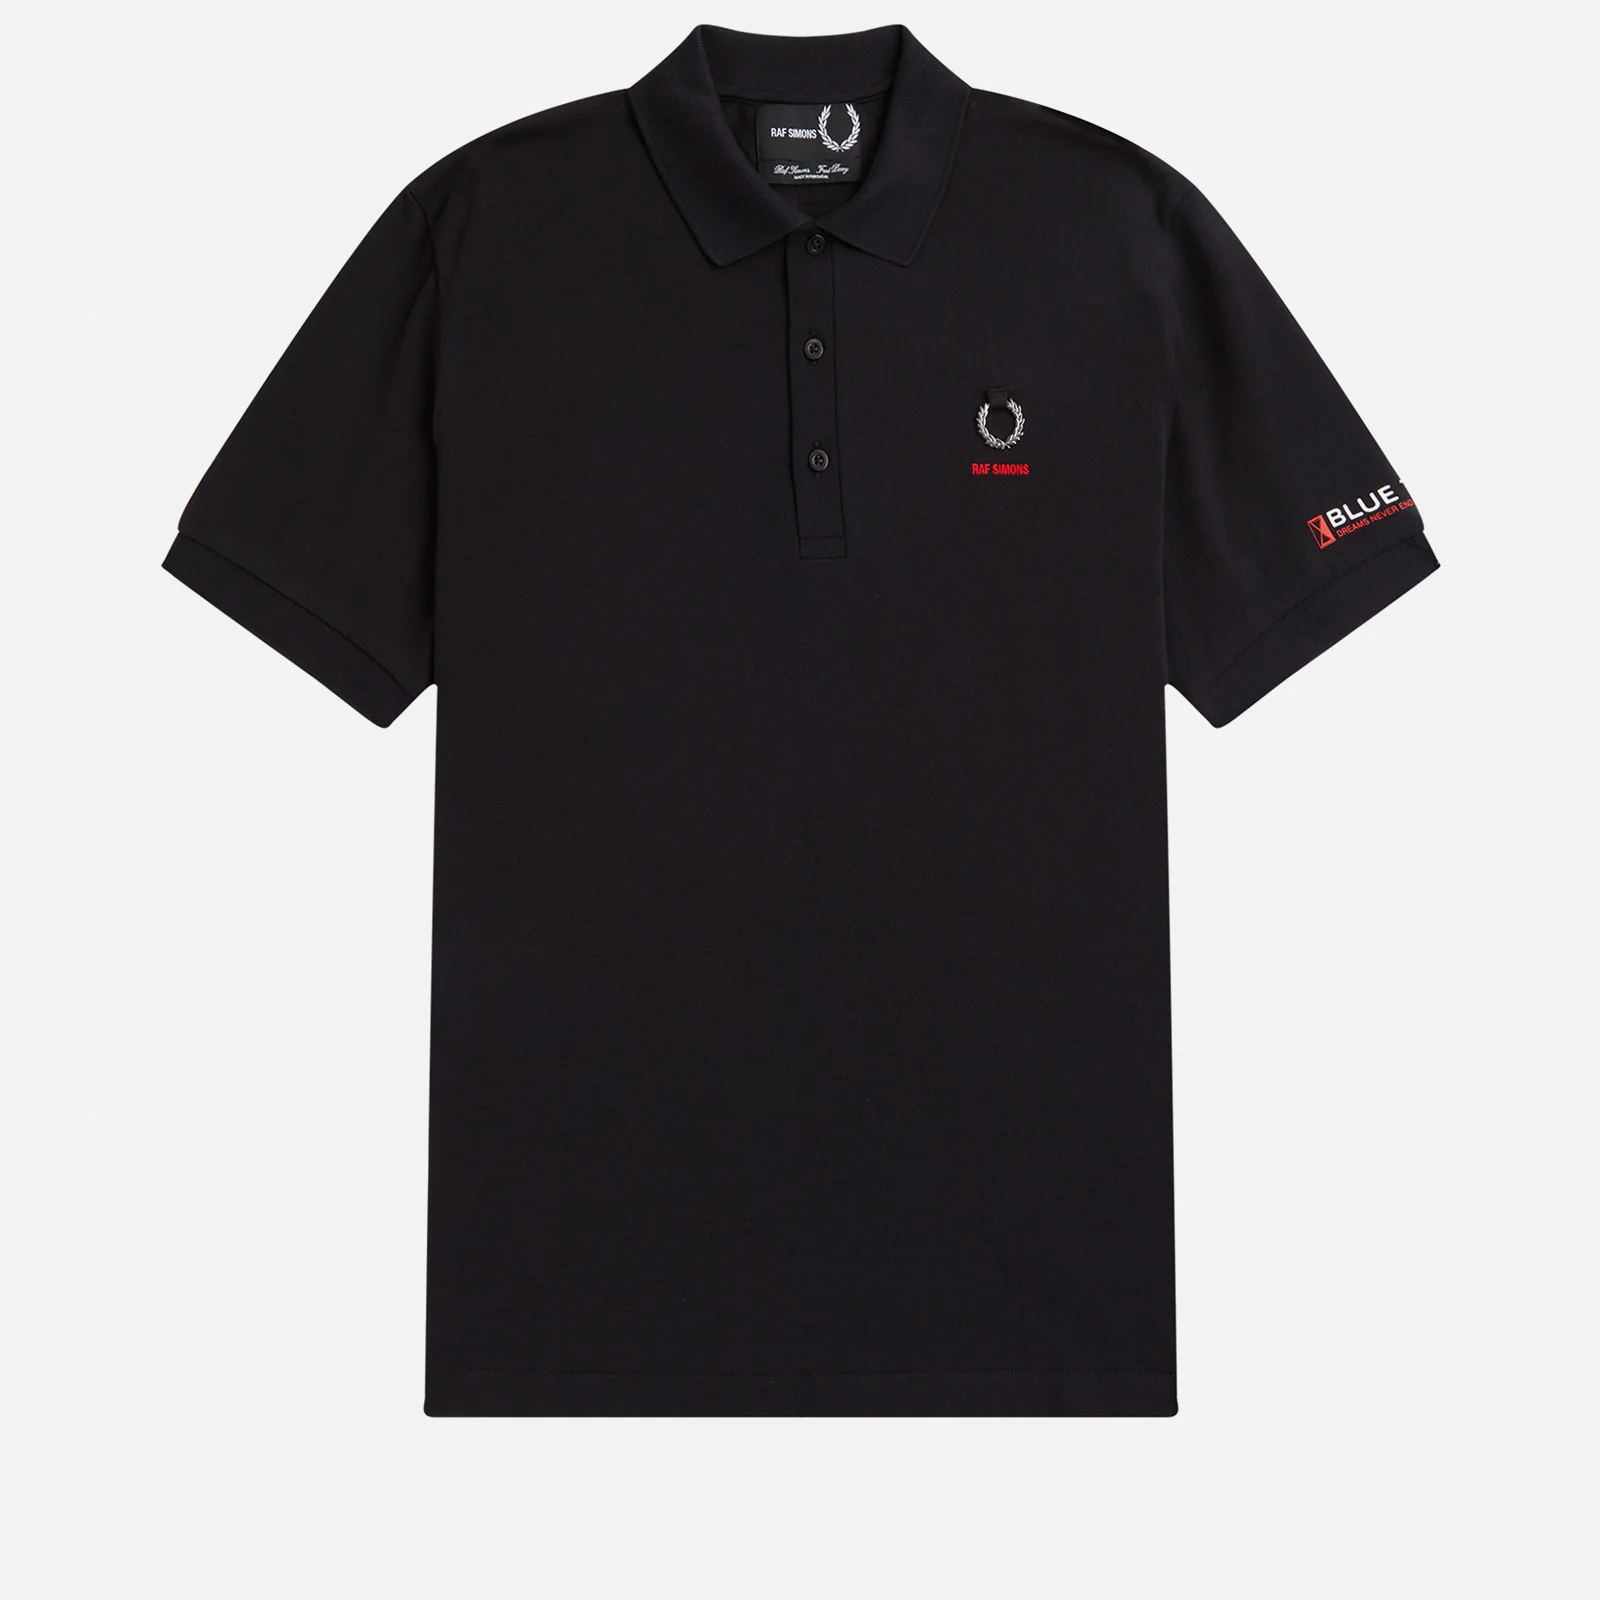 Fred Perry x Raf Simons Embroidered Cotton-Piqué Polo Shirt Image 1